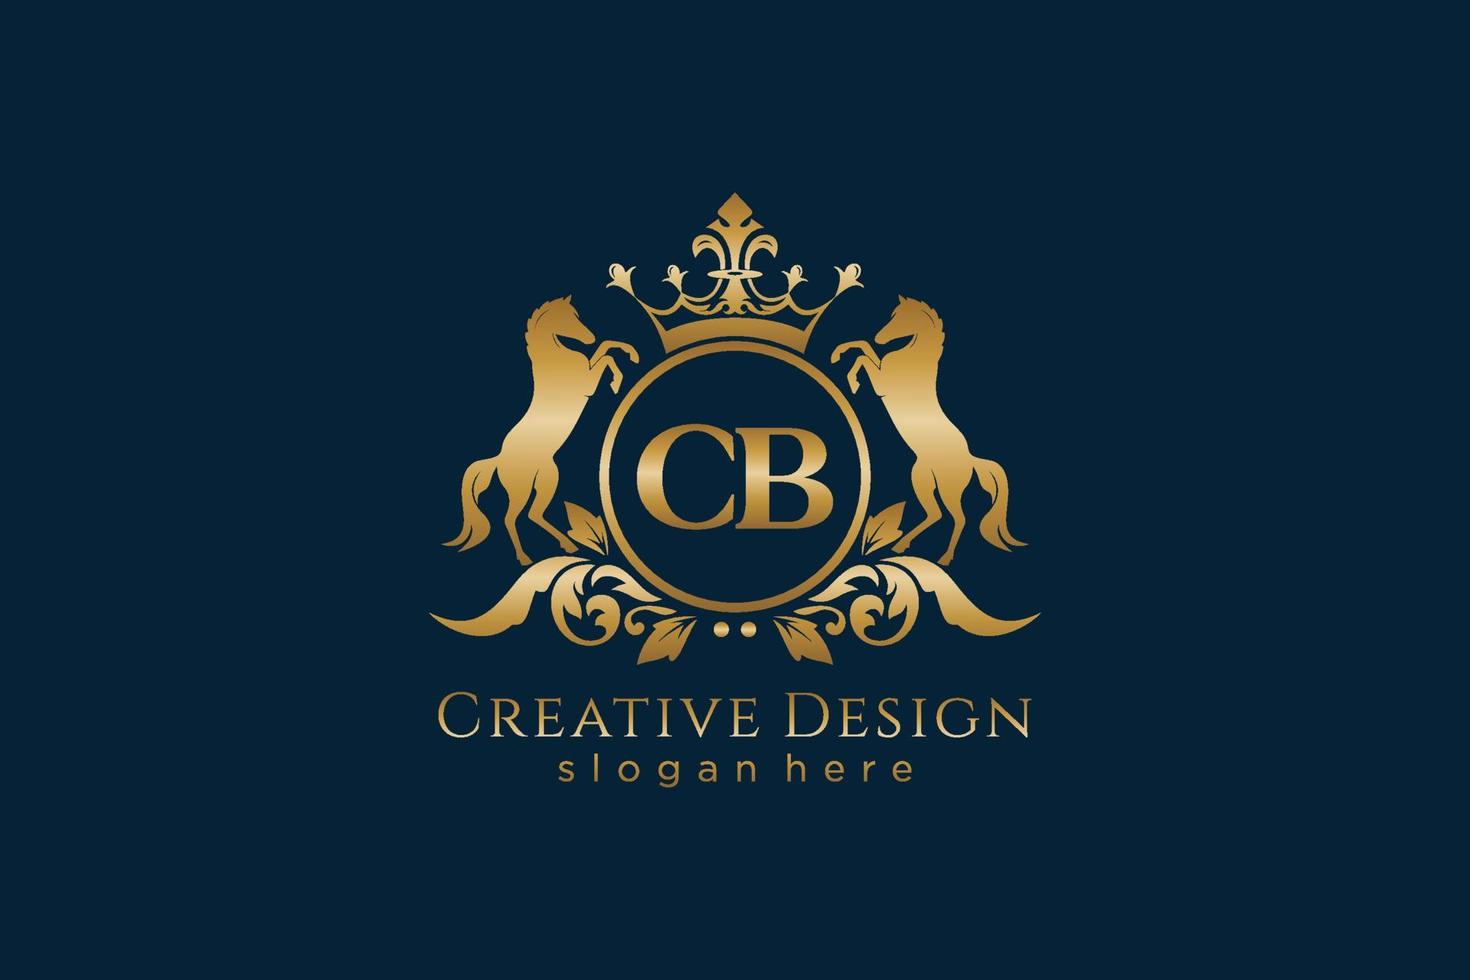 initial CB Retro golden crest with circle and two horses, badge template with scrolls and royal crown - perfect for luxurious branding projects vector